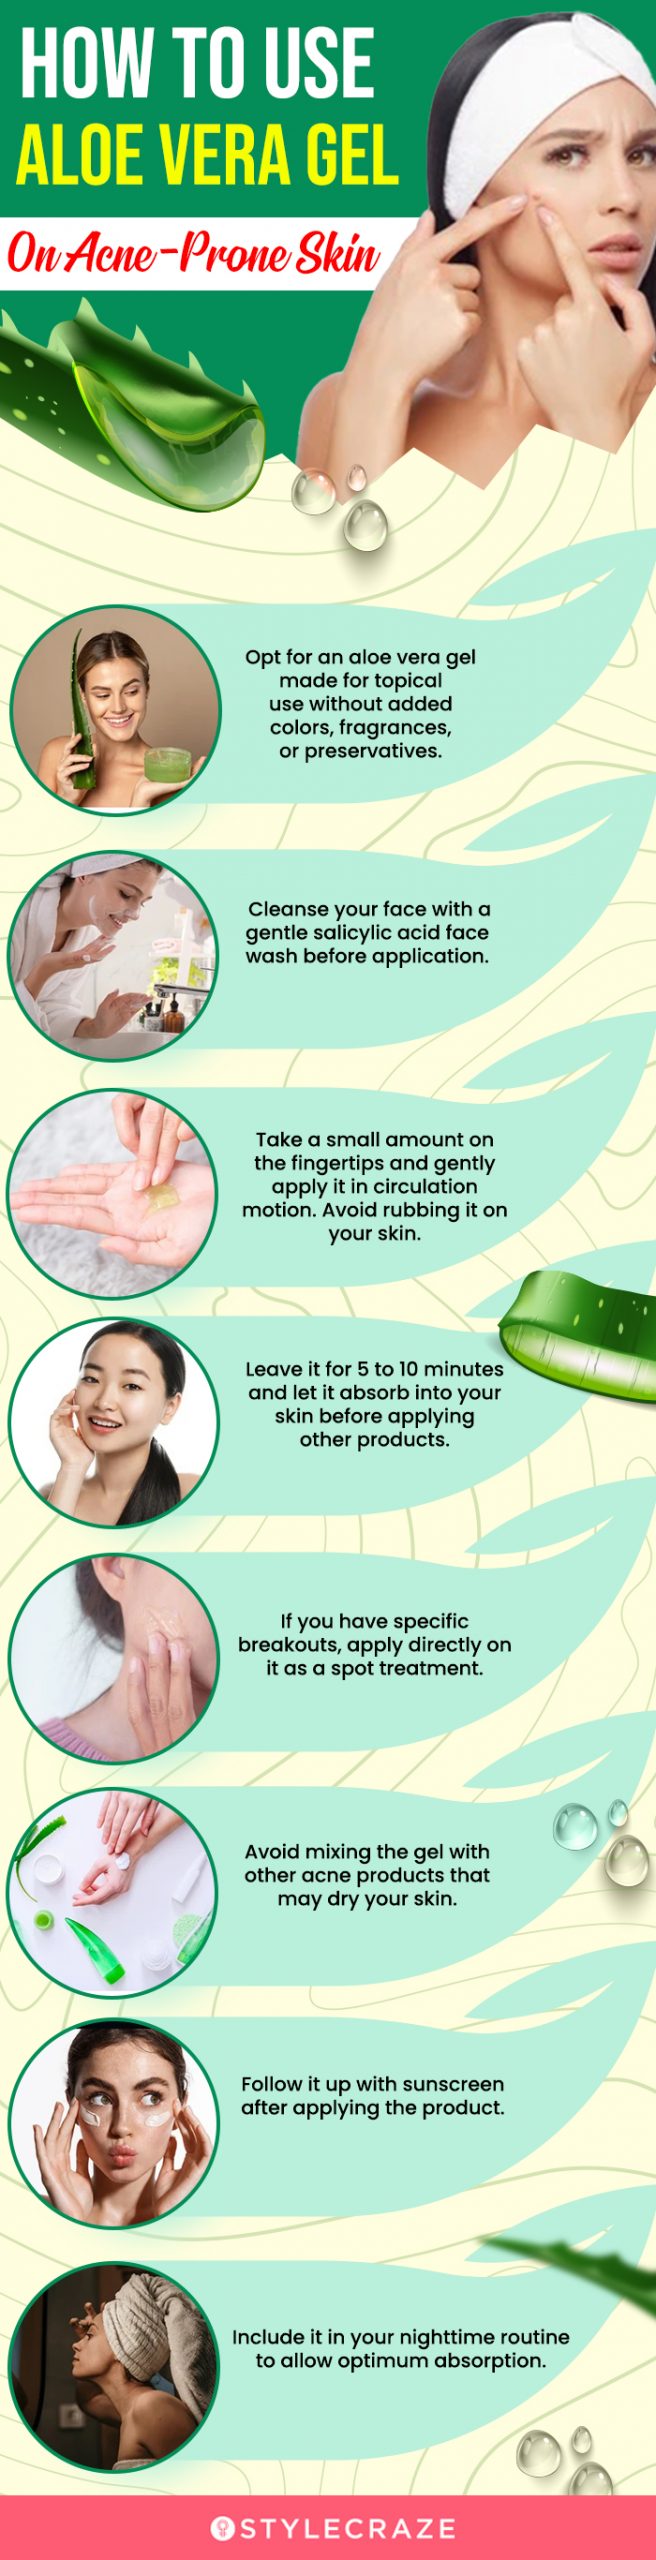 How To Use Aloe Vera Gel On Acne-Prone Skin (infographic)